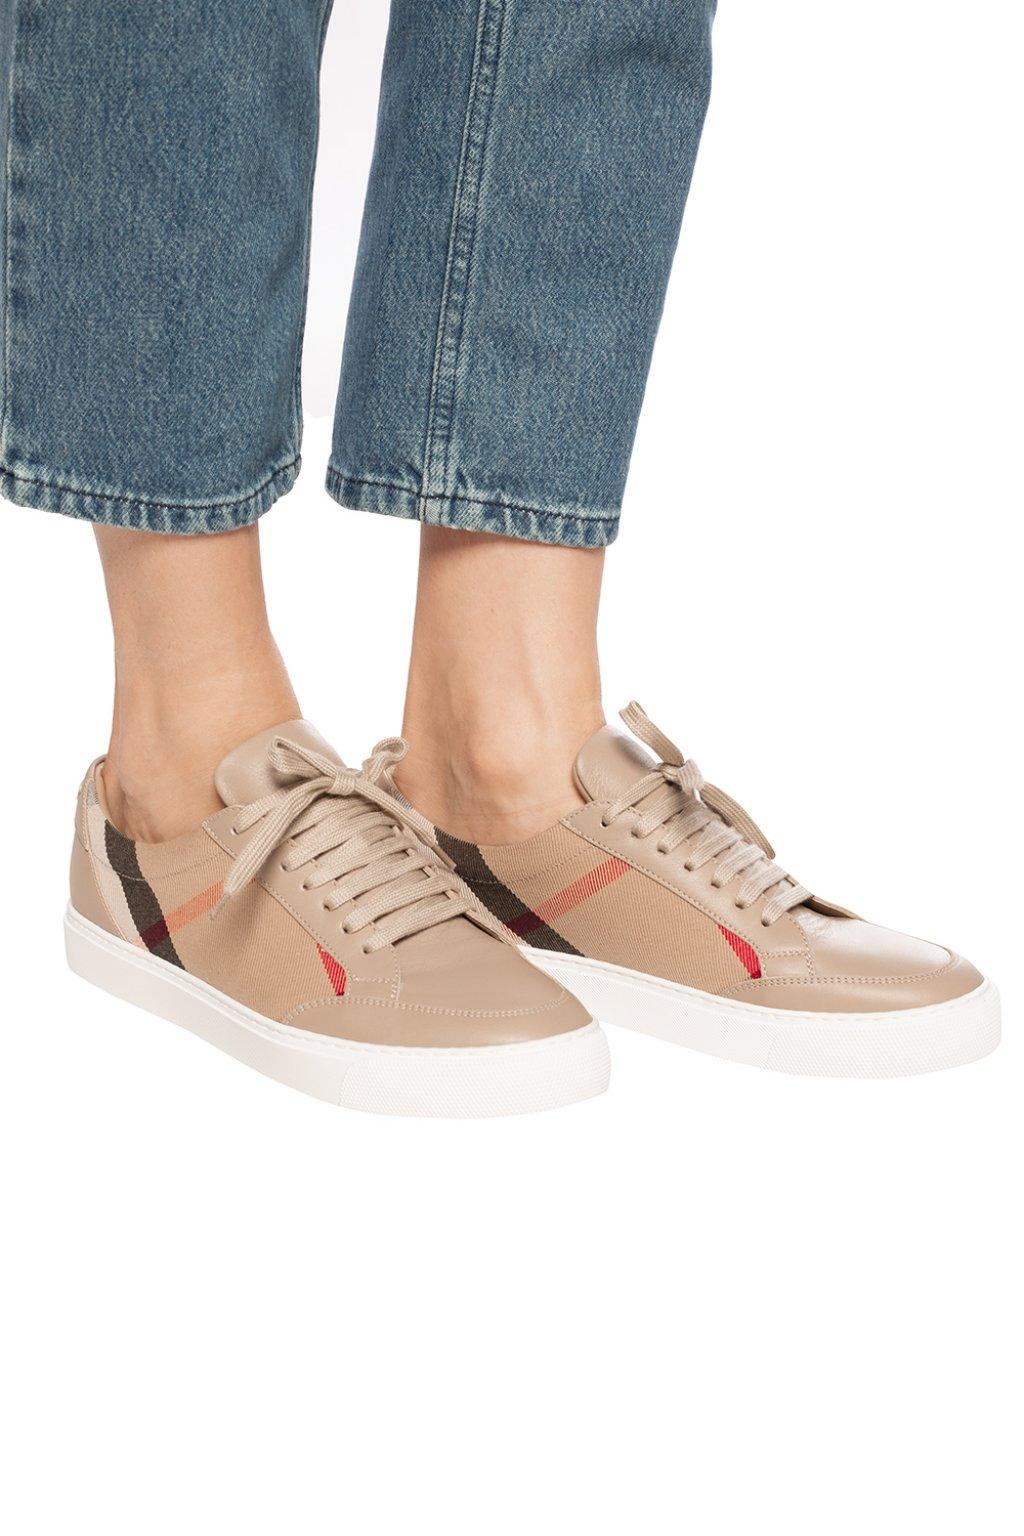 Burberry Salmond Lace Up Sneakers in Natural | Lyst Australia